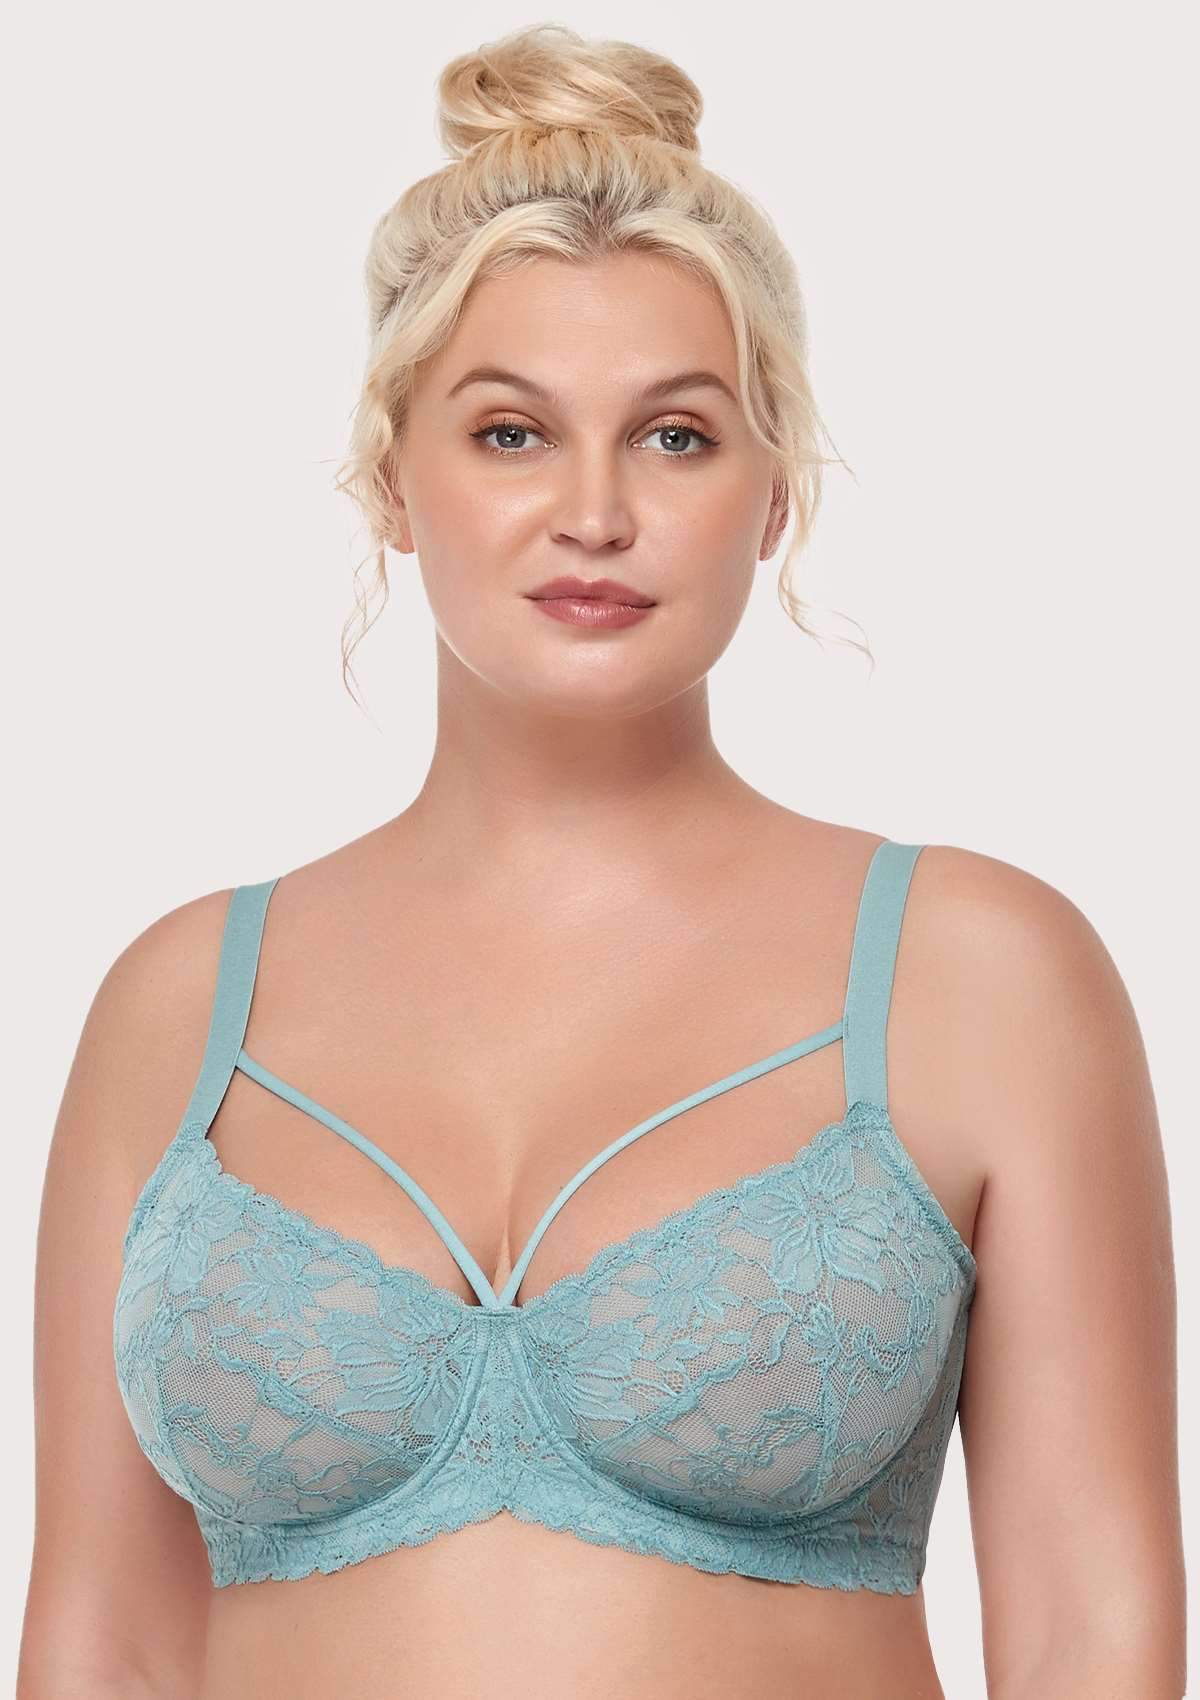 HSIA Pretty In Petals Unlined Lace Bra: Comfortable And Supportive Bra - Pewter Blue / 38 / DDD/F